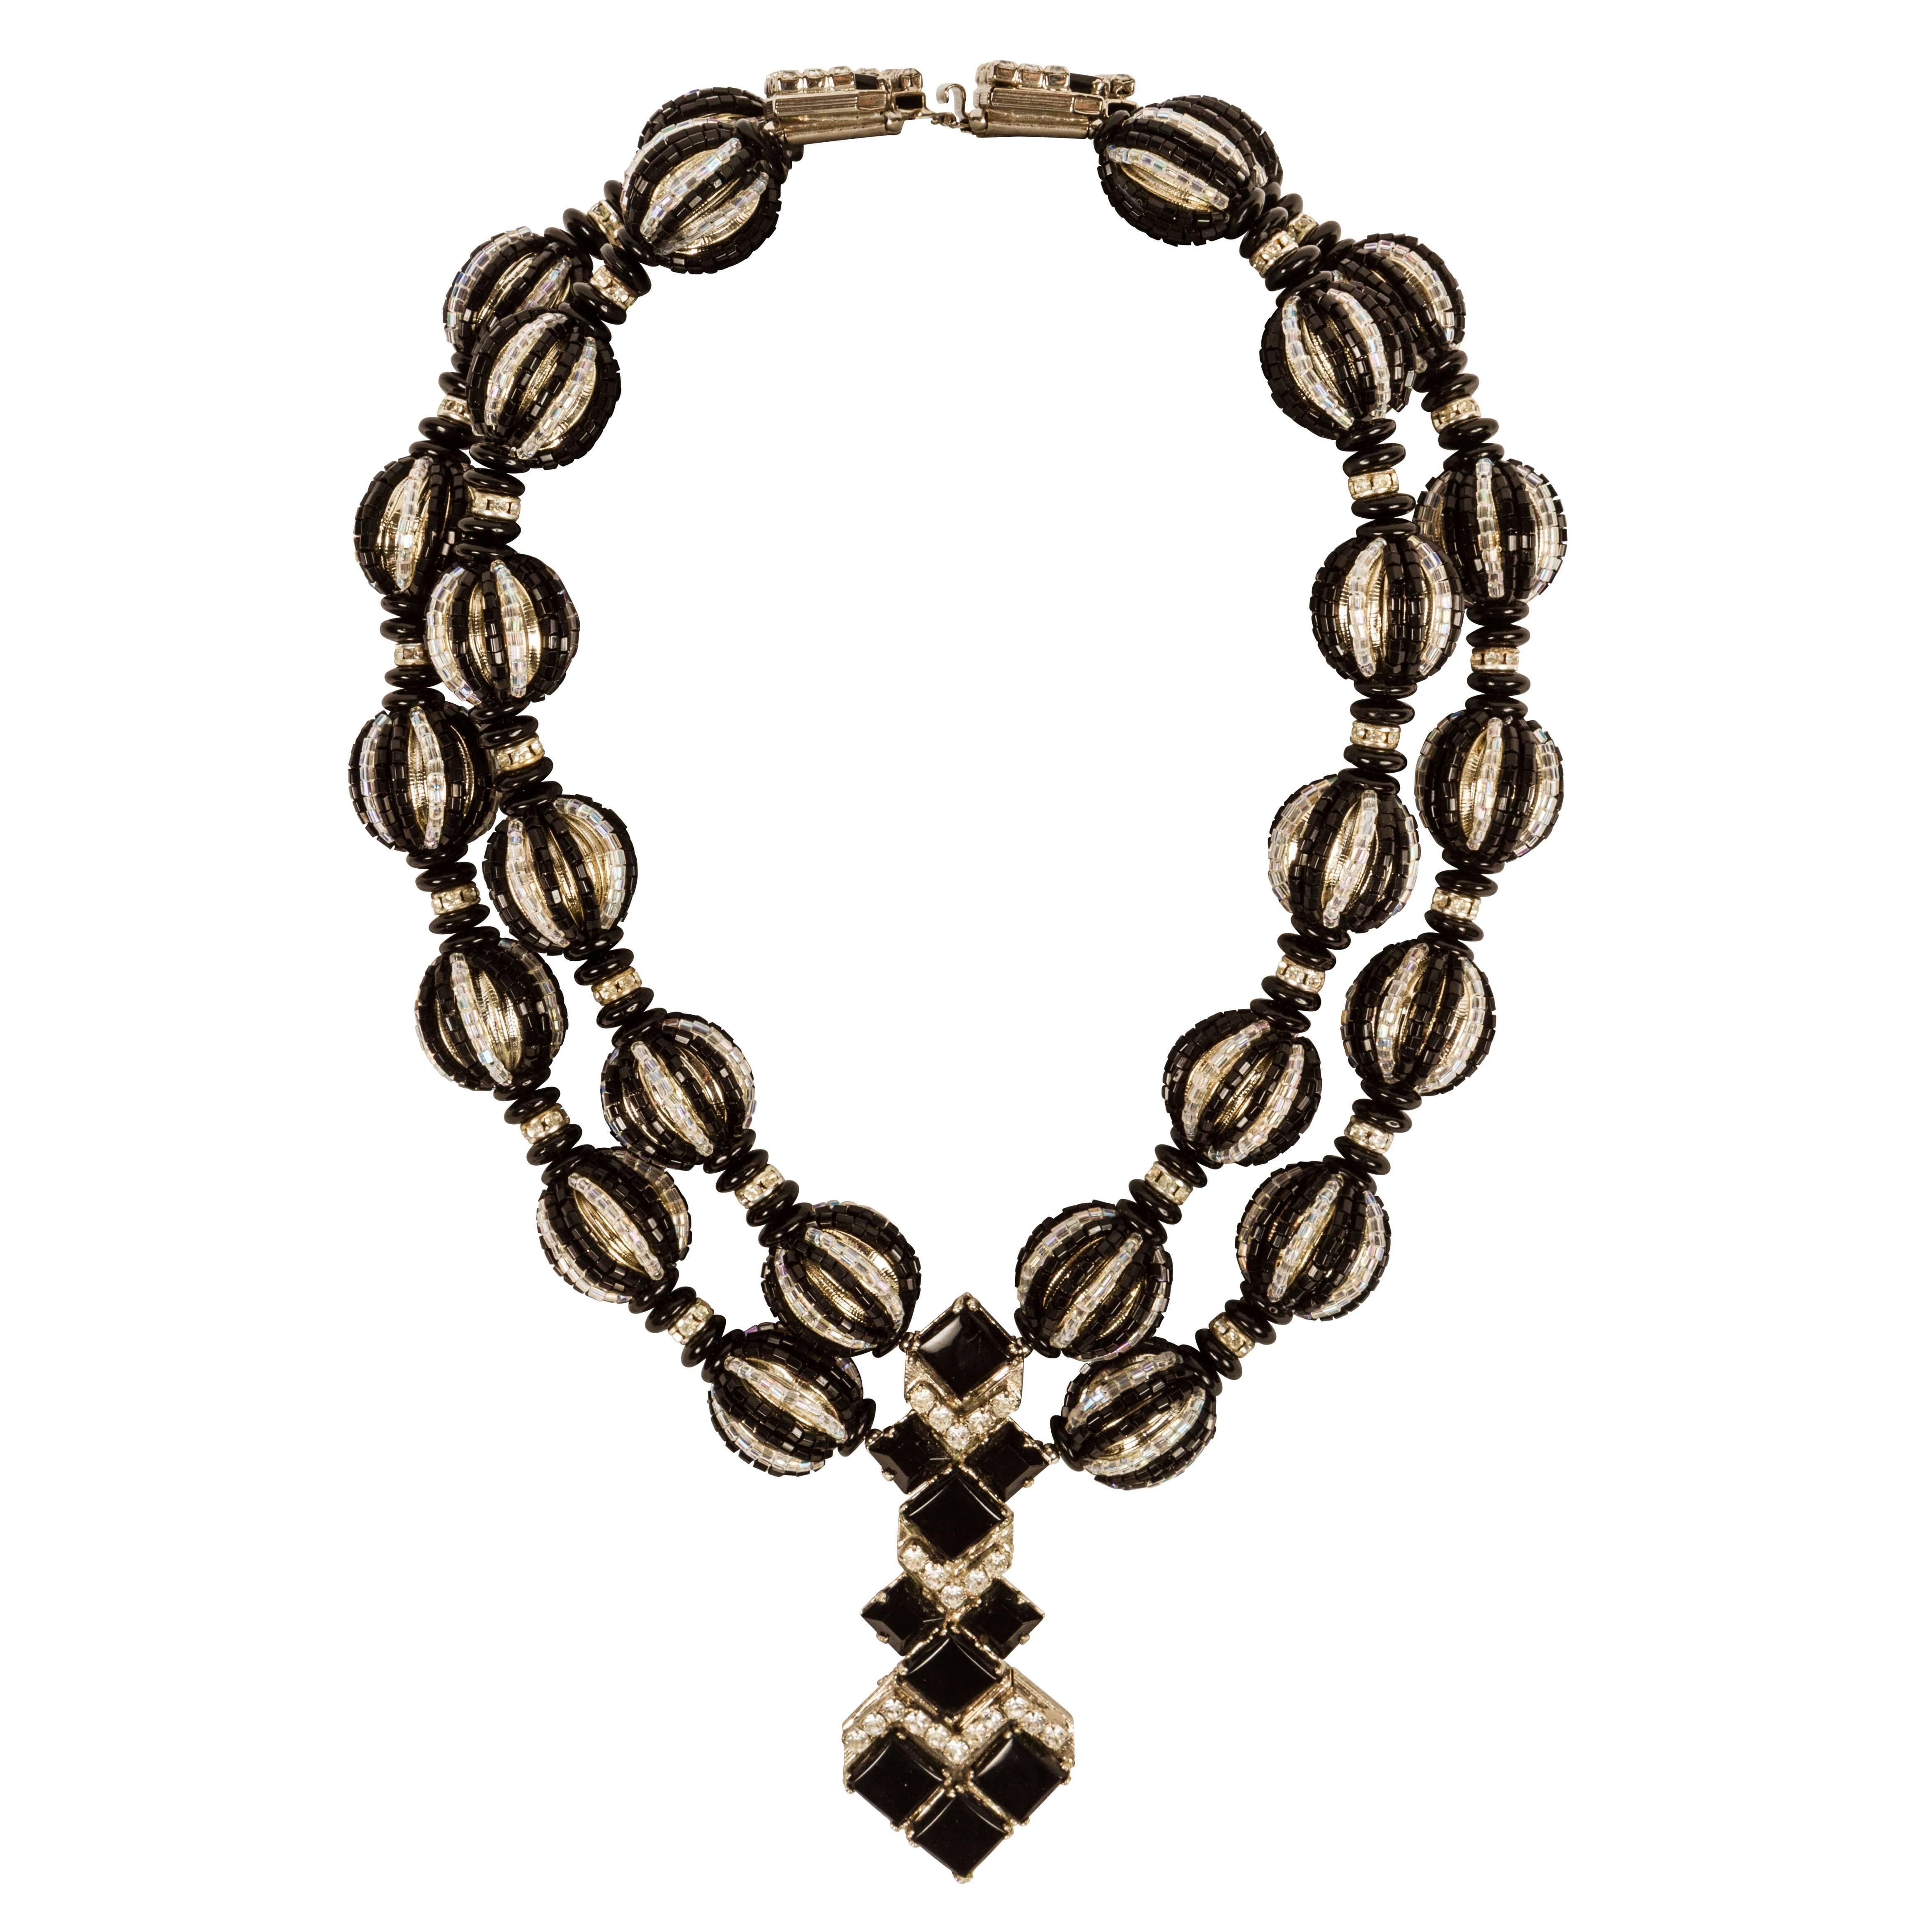 An Art Deco Inspired Necklace by William DeLillo For Sale